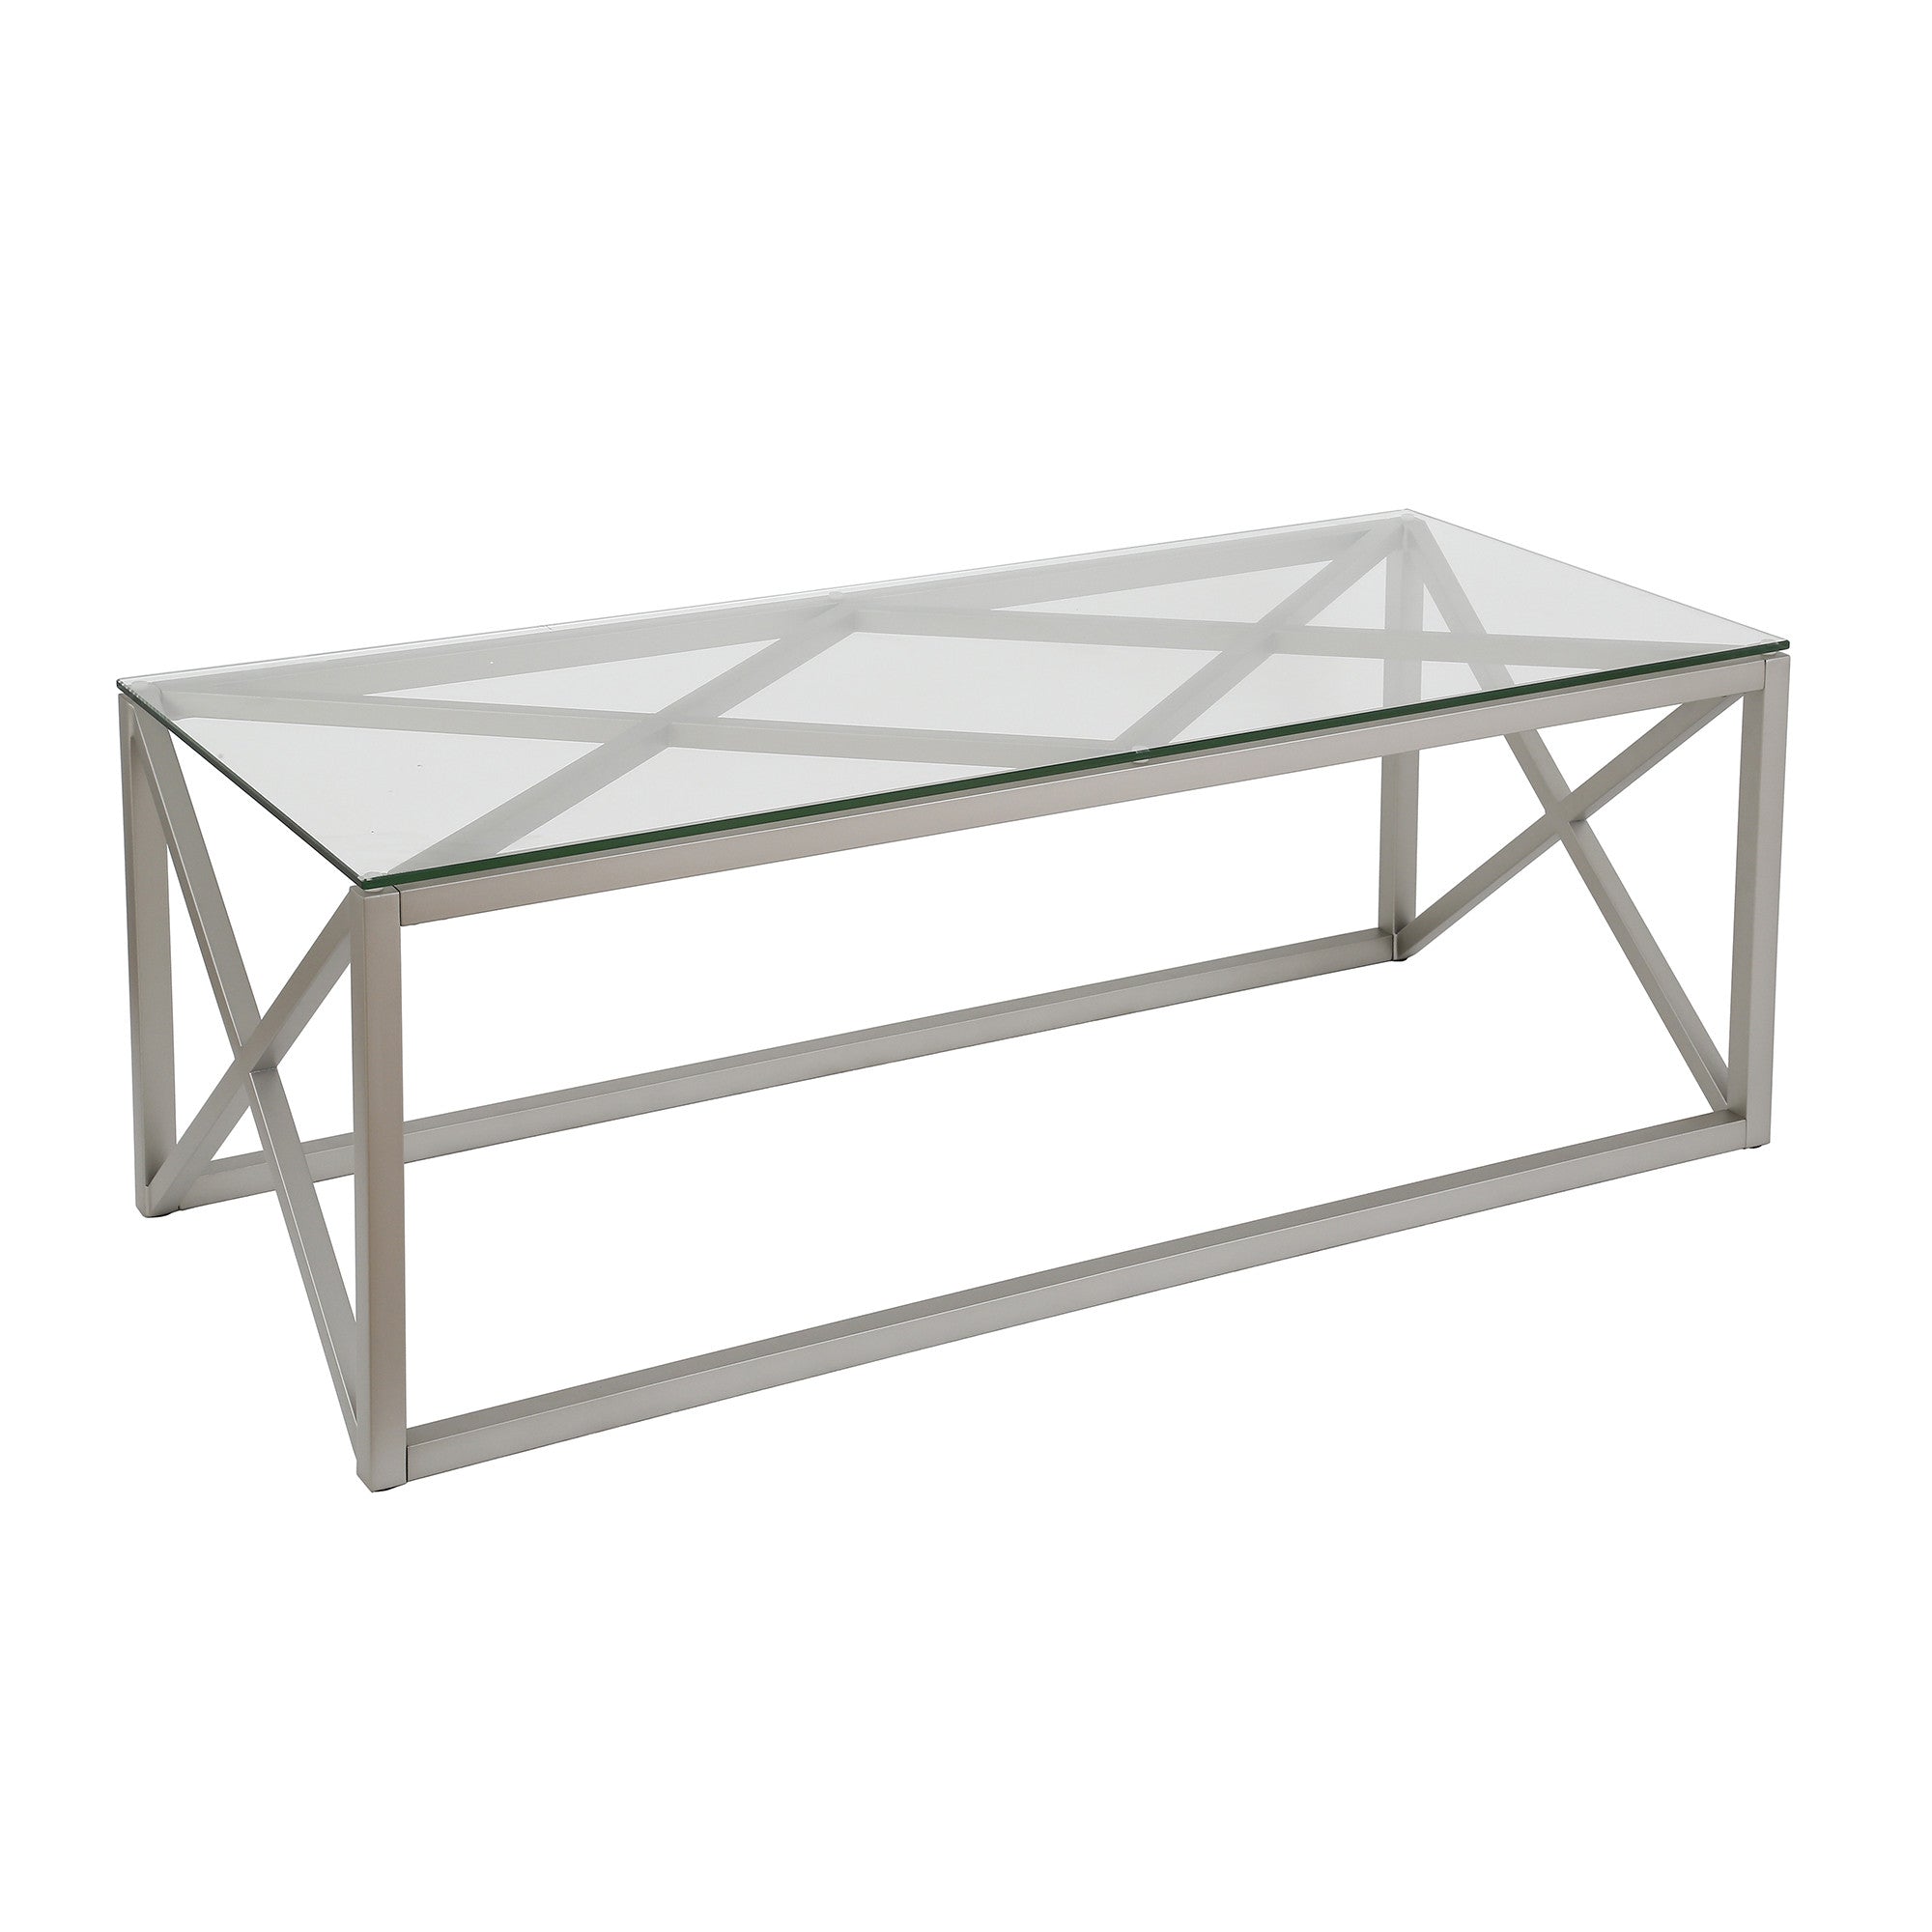 46" Silver Glass And Steel Coffee Table